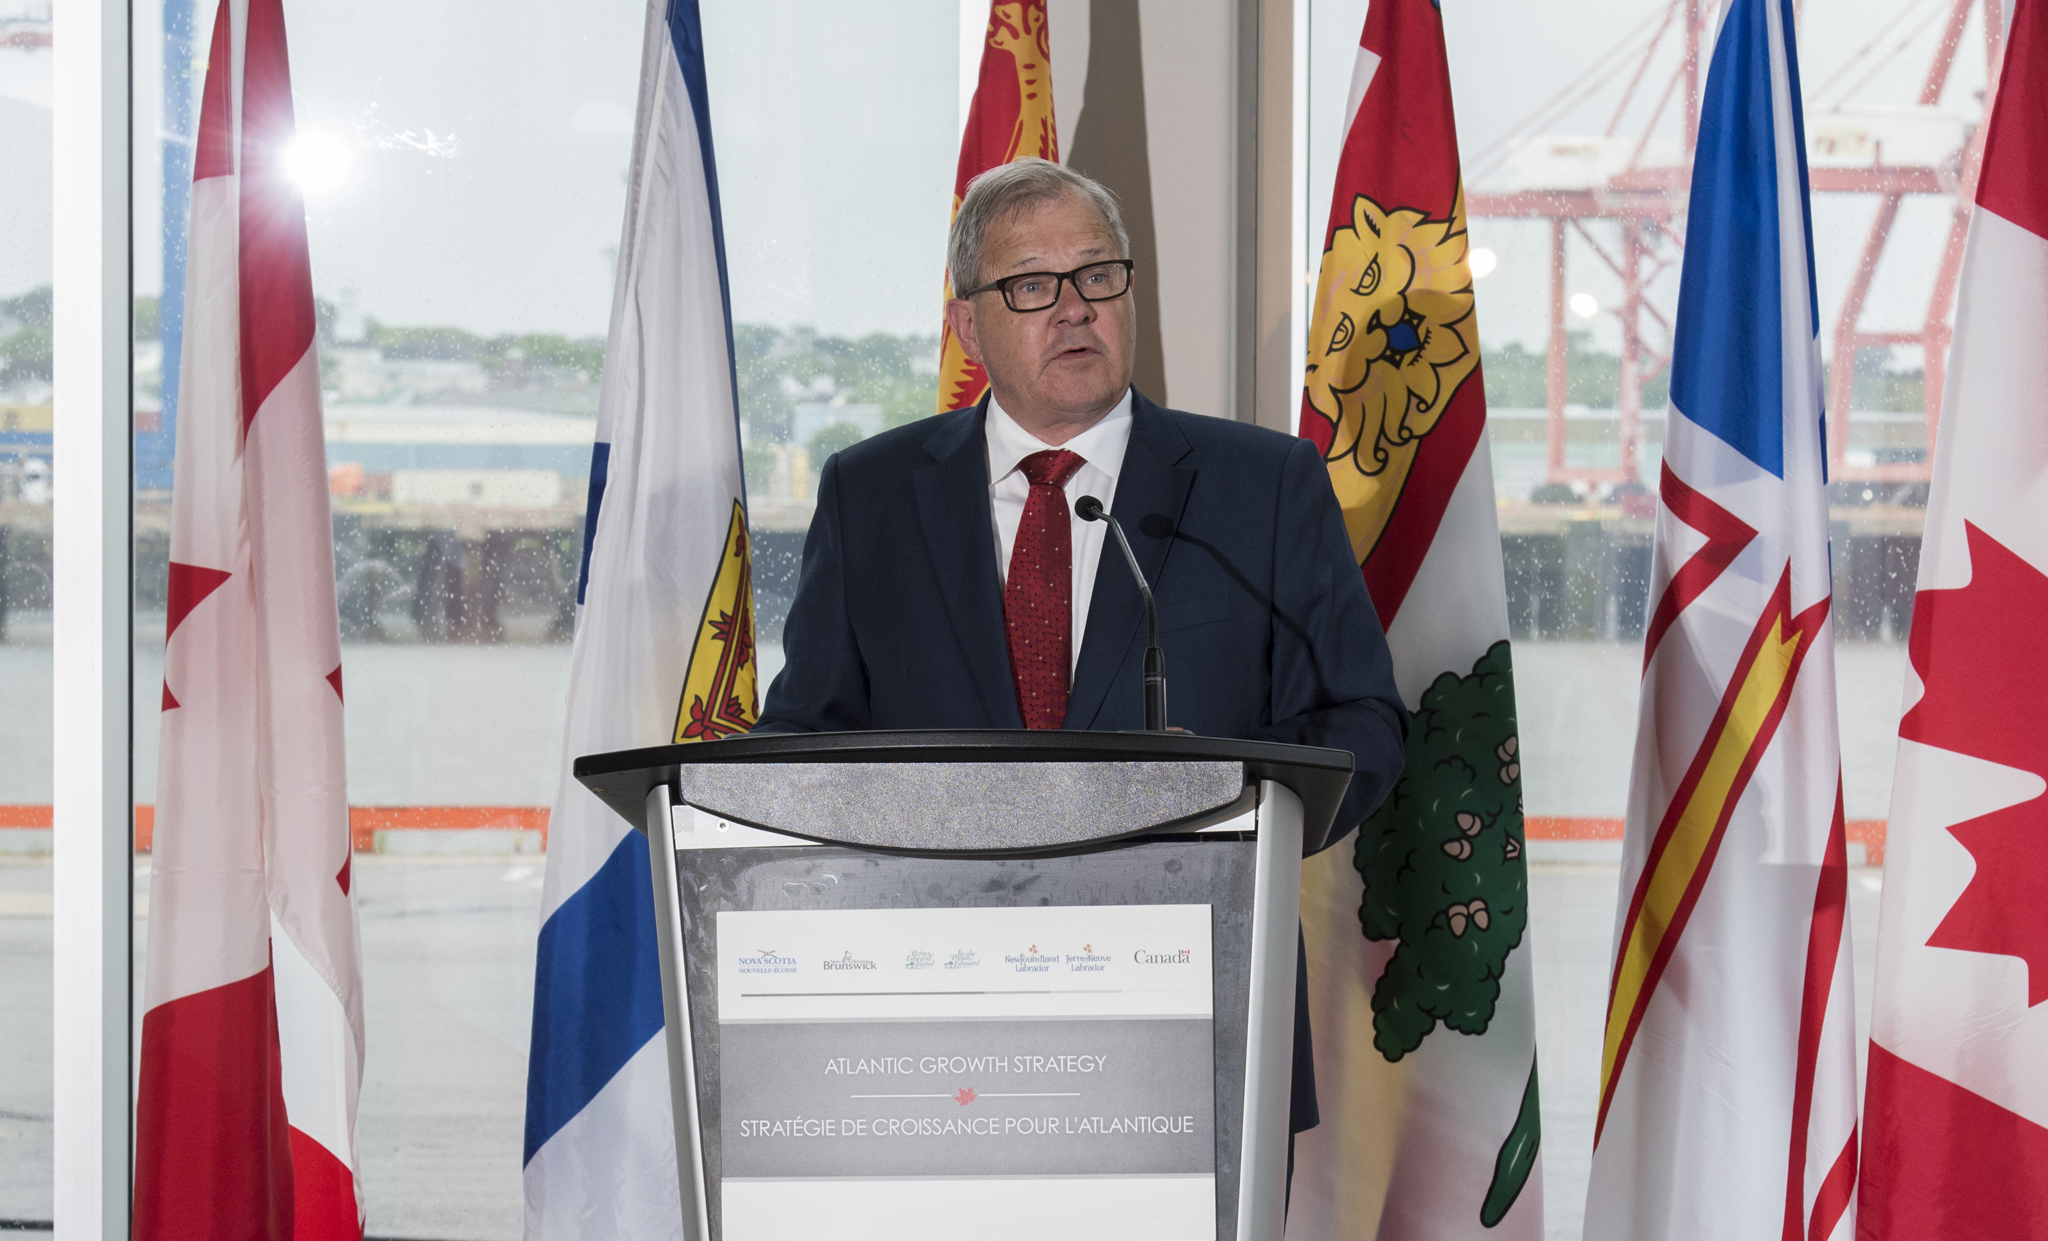 July 4, 2017 - The Honourable Lawrence MacAulay, Minister of Agriculture and Agri-Food, and member of the Atlantic Leadership Committee, shares what the new Atlantic Trade and Investment Growth Strategy, announced in Saint John, New Brunswick, means for the seafood, agriculture, and food and beverage sectors.